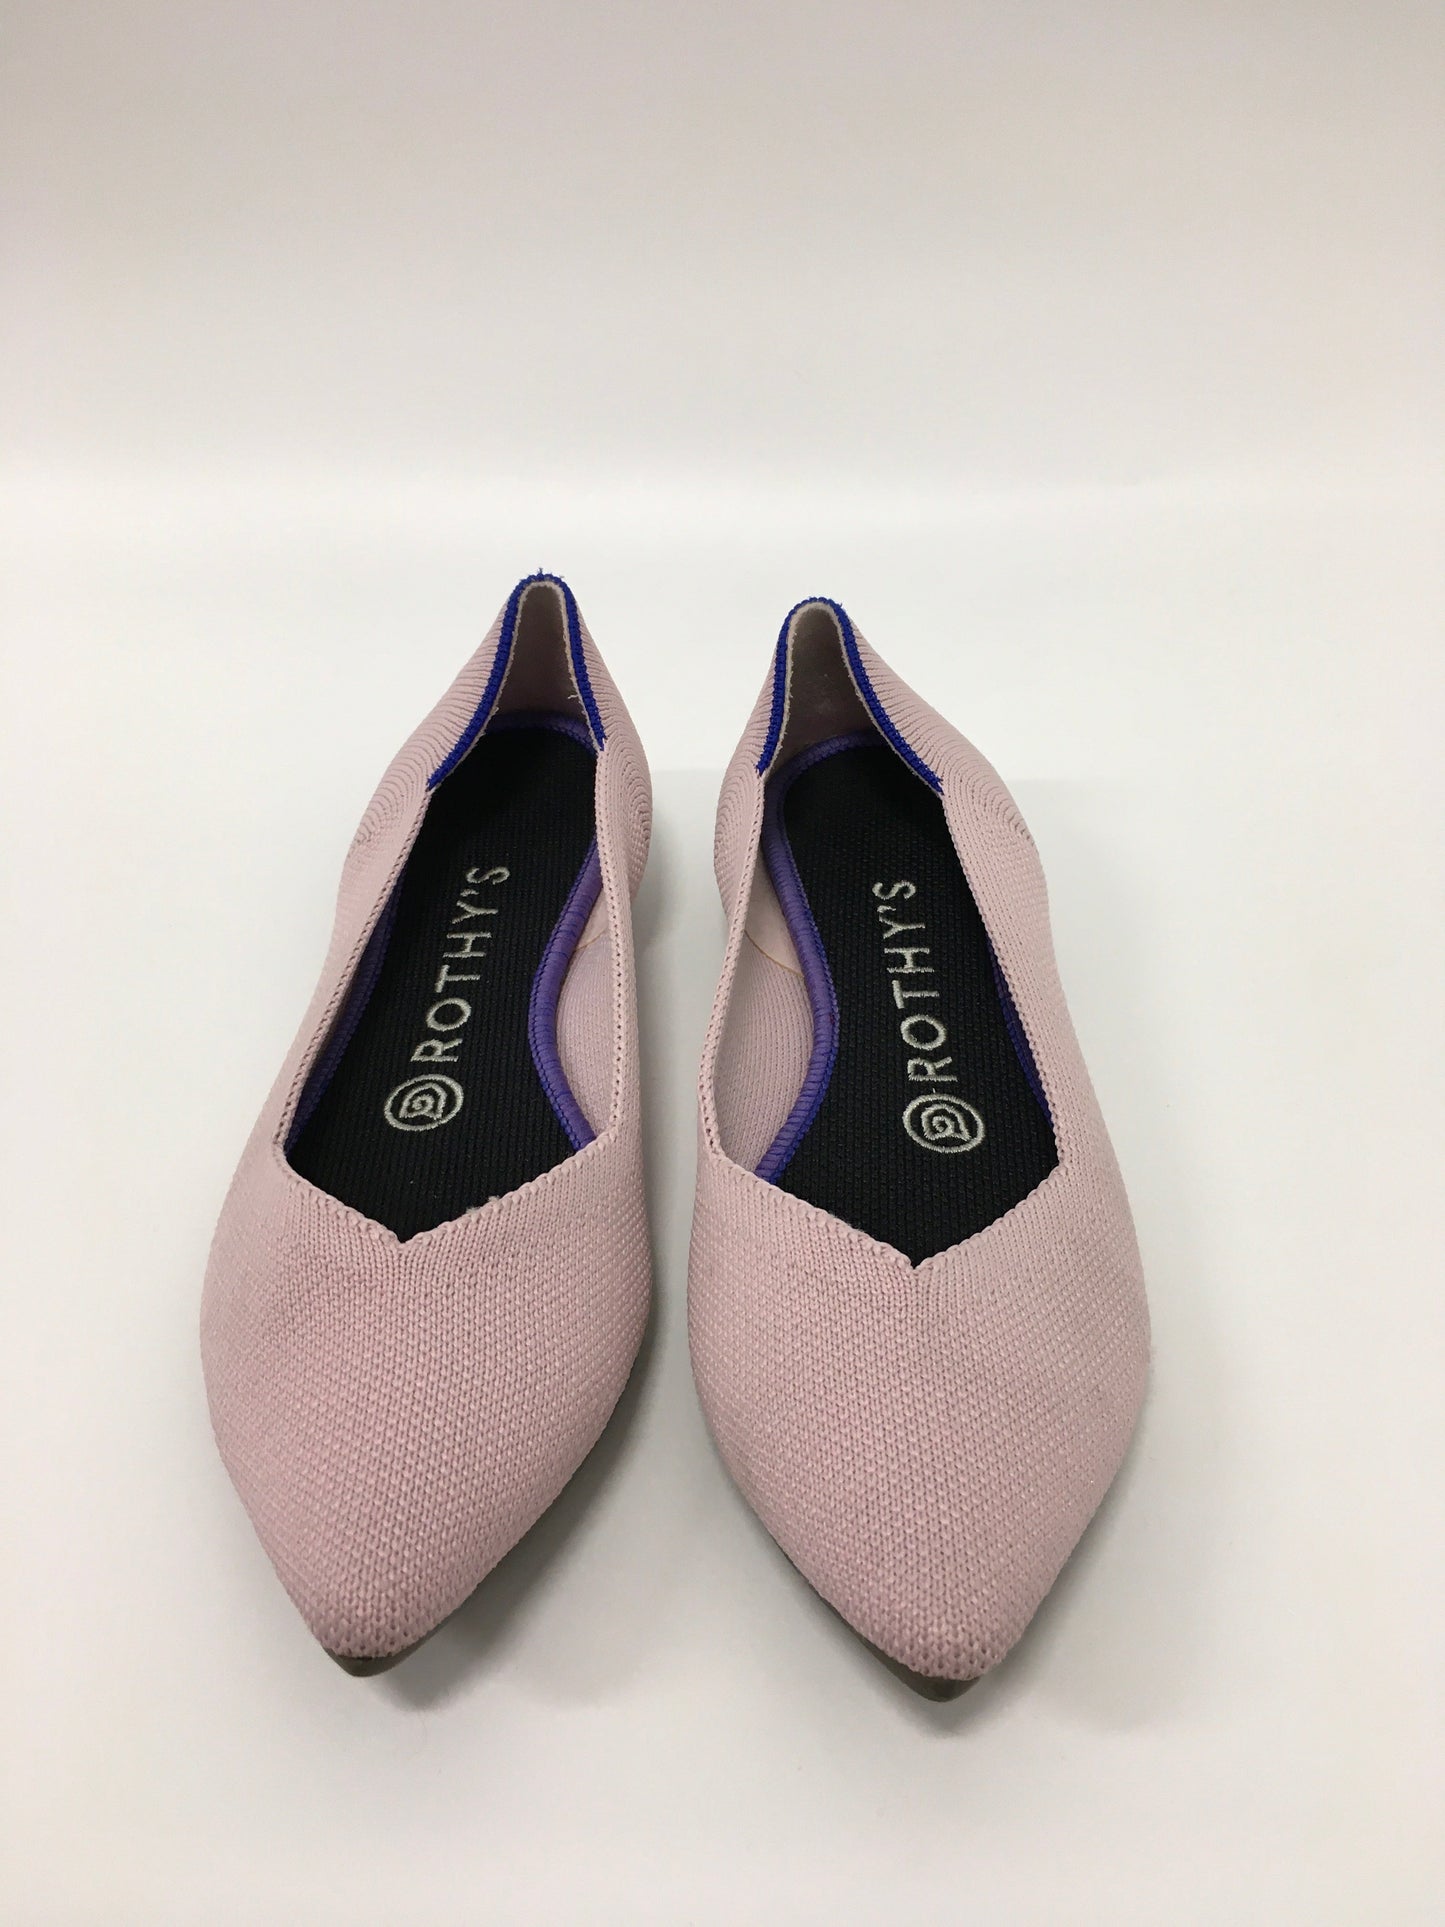 Shoes Flats Ballet By Rothys  Size: 6.5